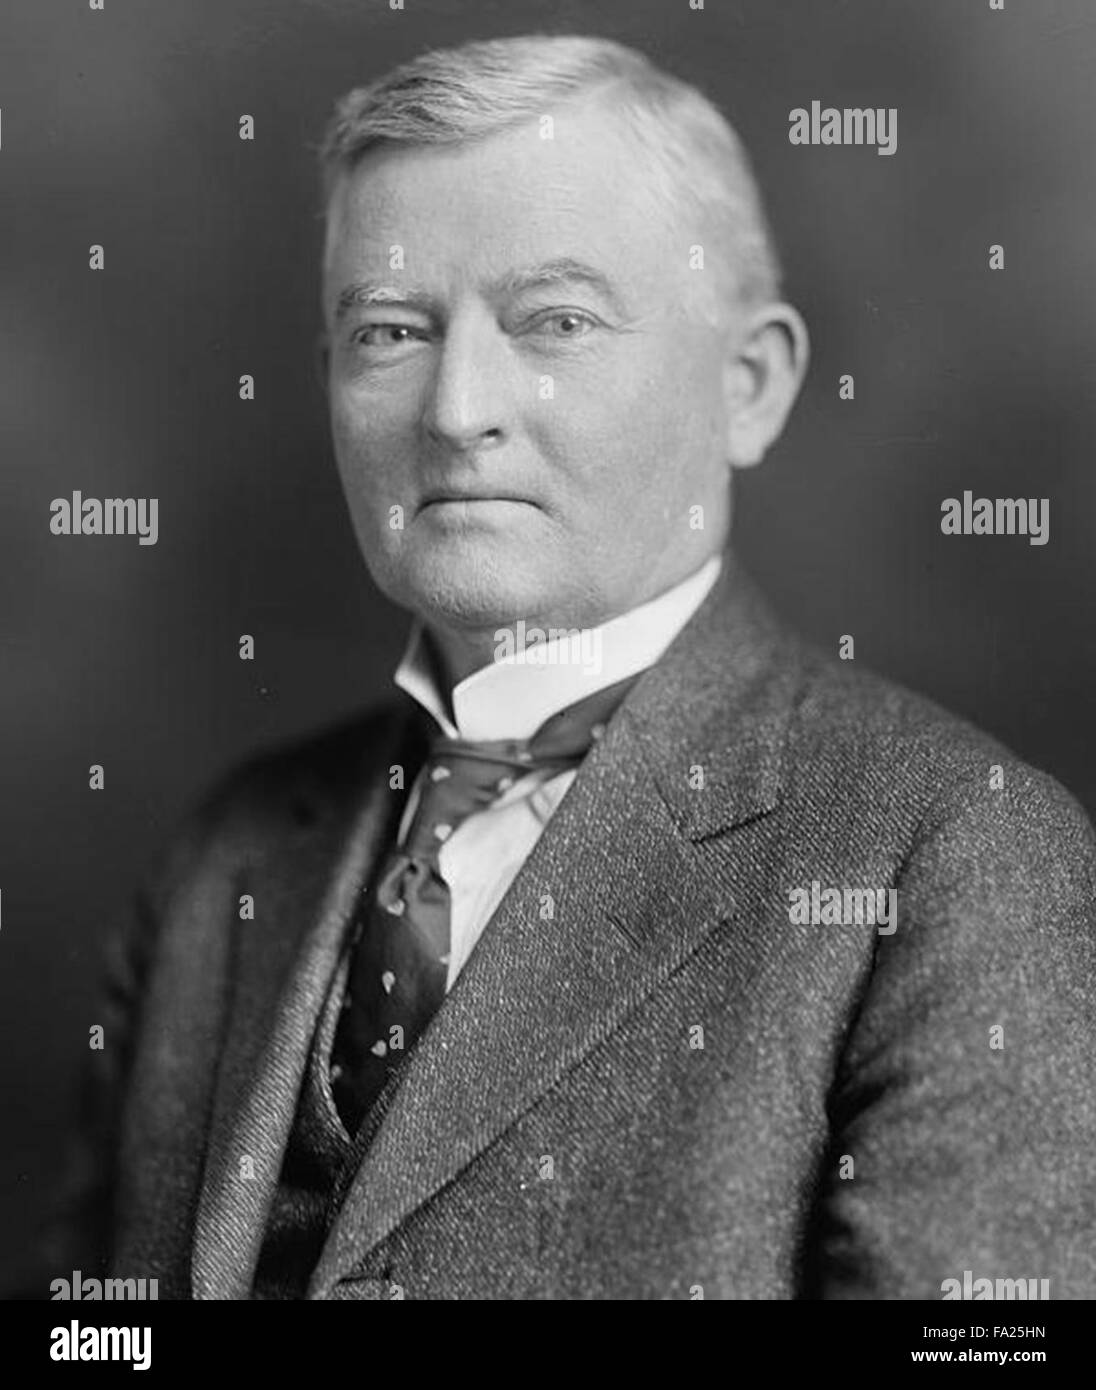 John Nance Garner III,  American Democratic politician and lawyer and the 32nd Vice President of the United States, serving from 1933 to 1941. Stock Photo